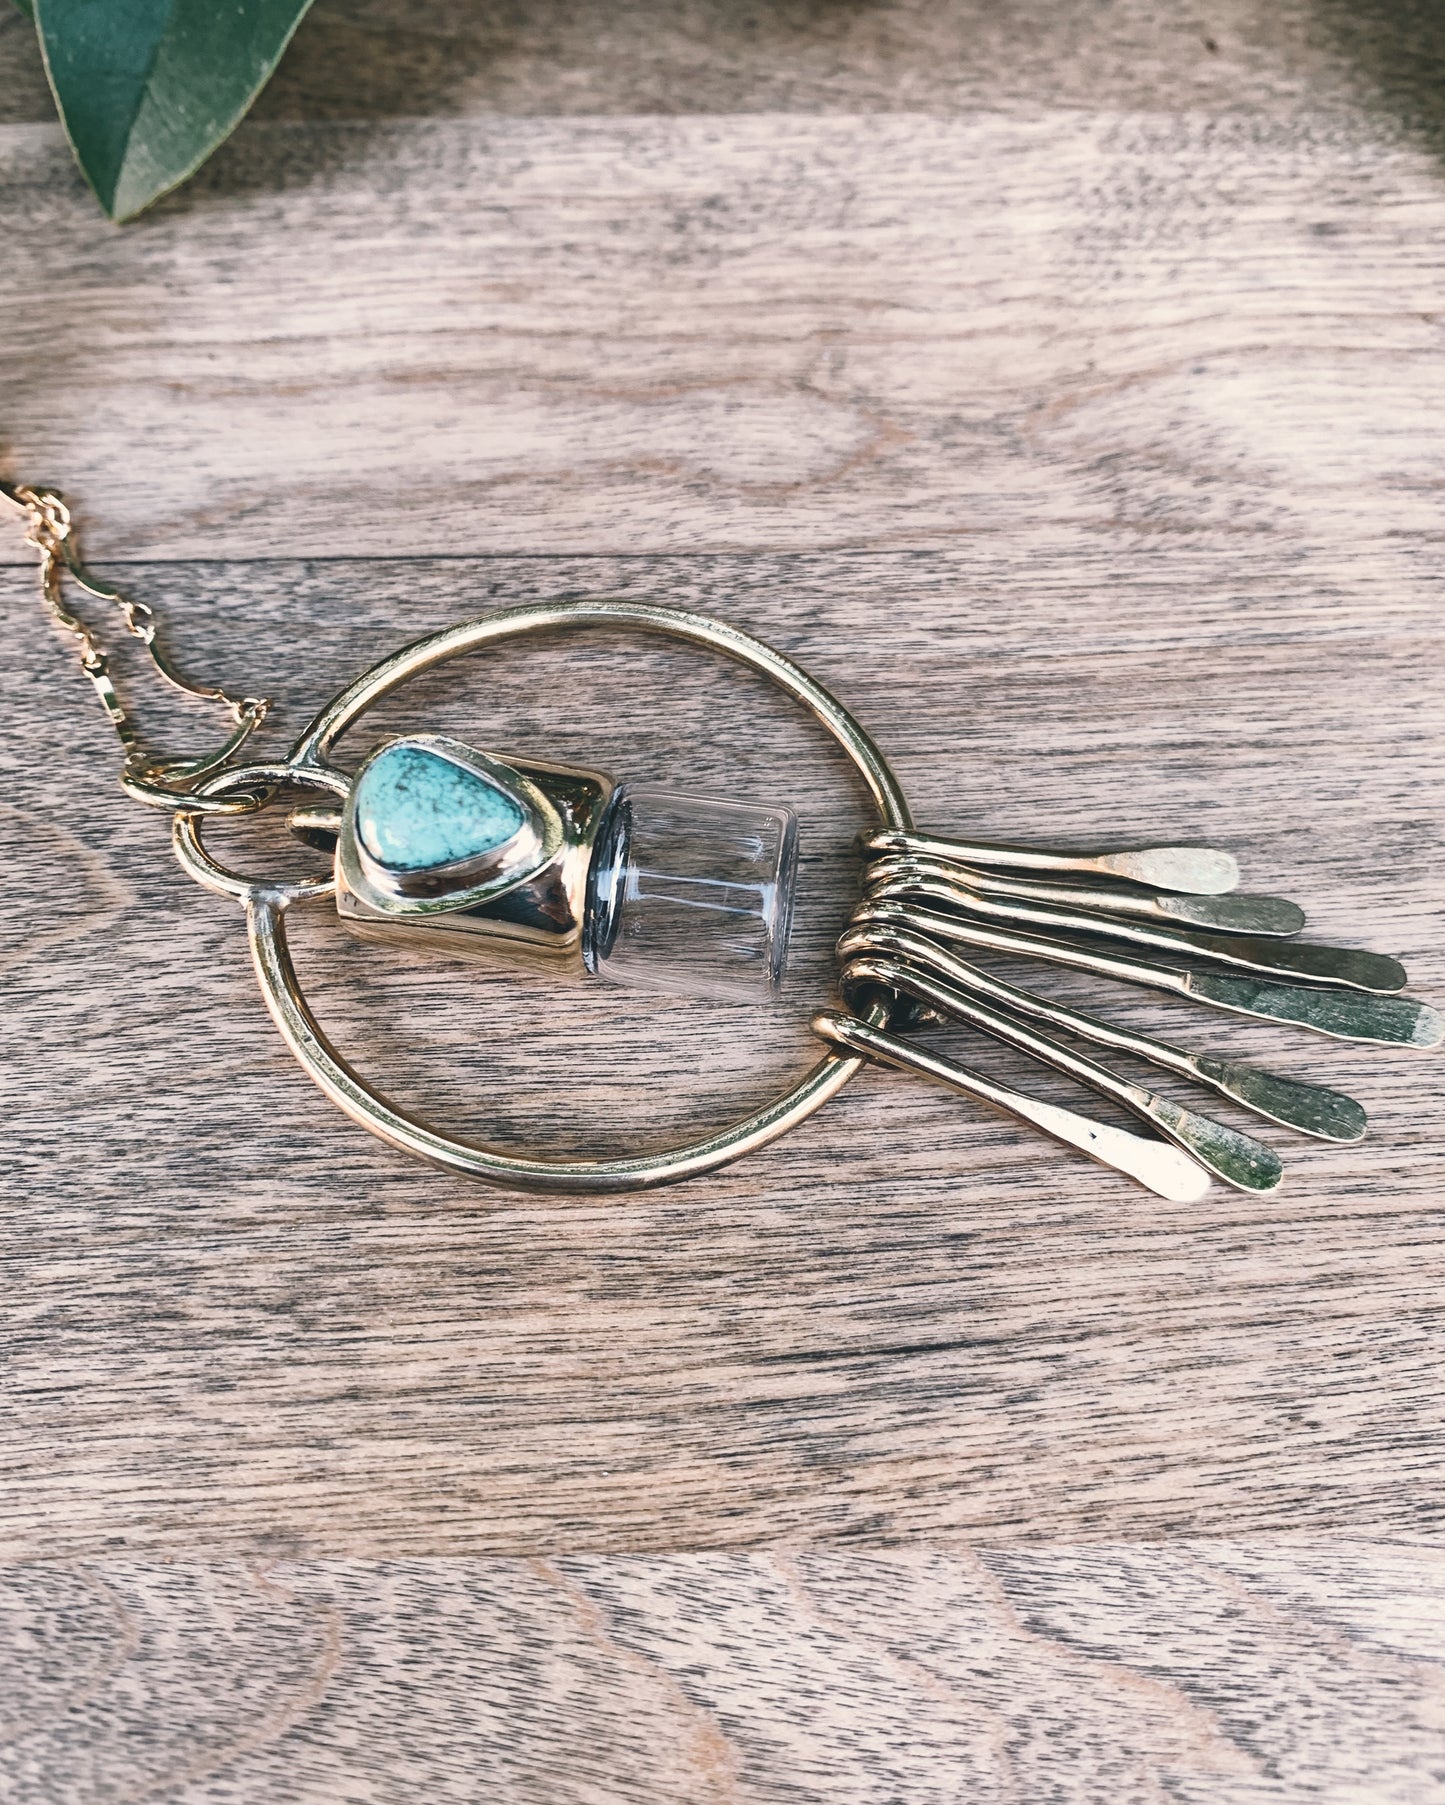 Oleum Dream Catcher - Candelaria Turquoise and Brass Rollerball Necklace